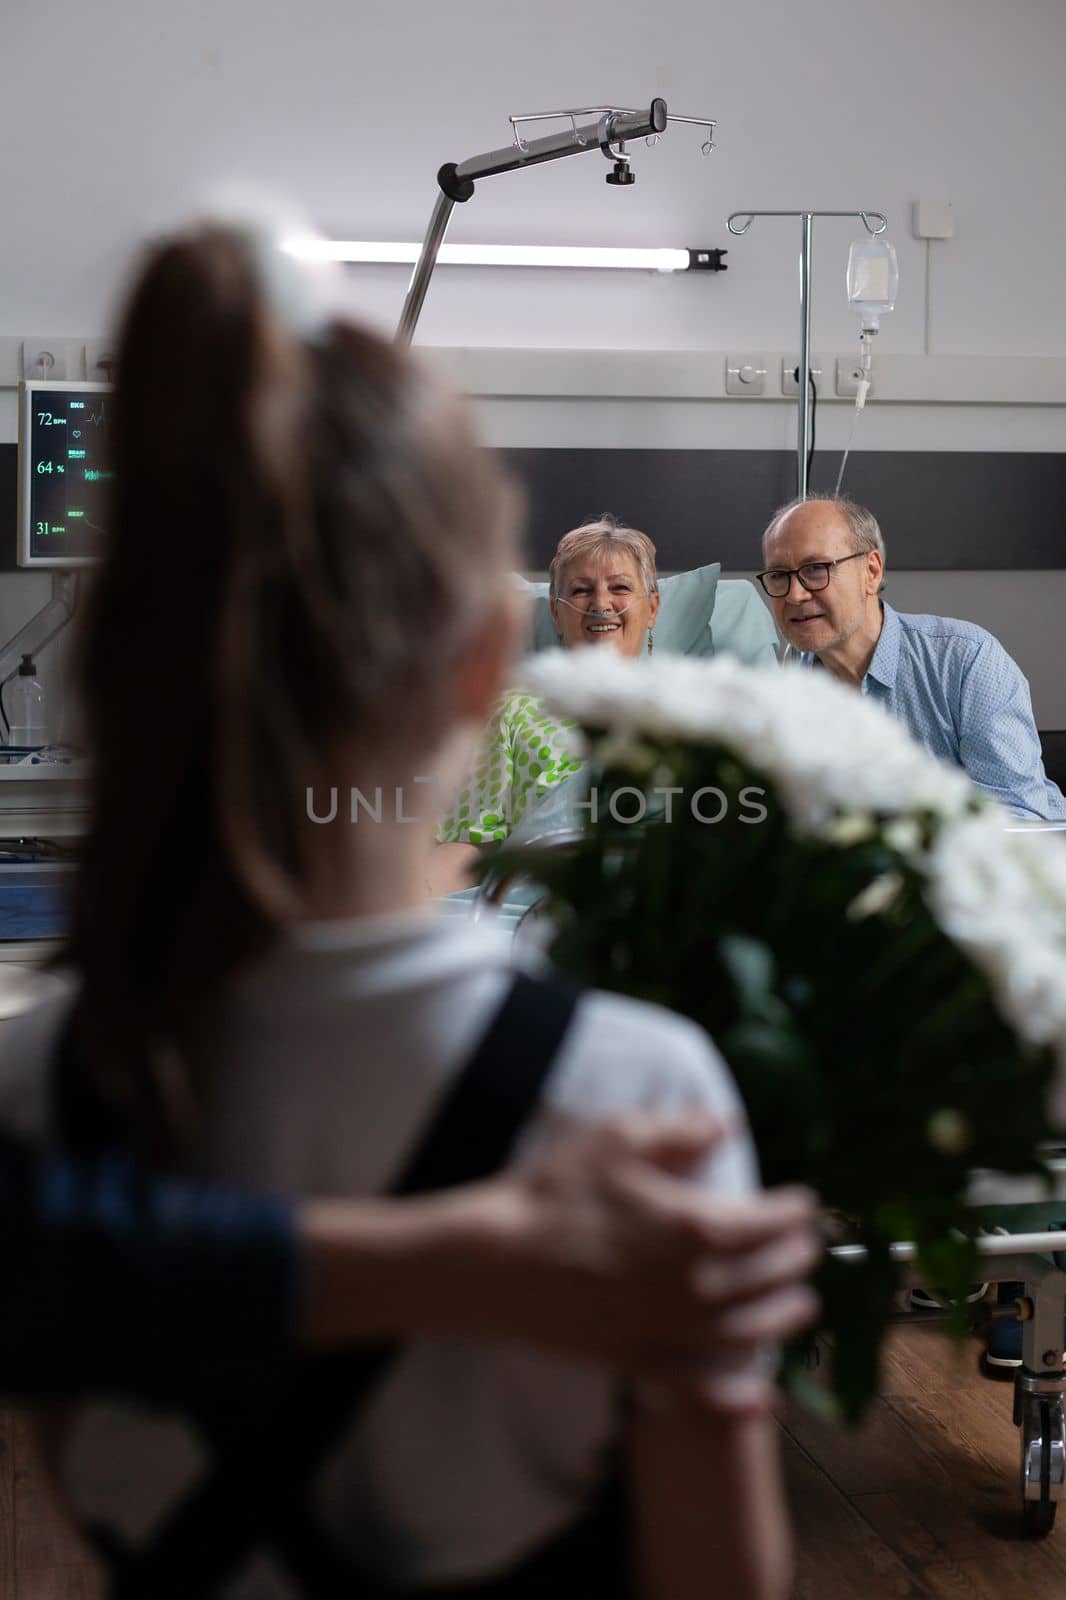 Smiling grandmother watching granddaughter arriving for visit at hospital room, holding flowers bouquet. Elderly couple happily greeting relatives in geriatric clinic room.